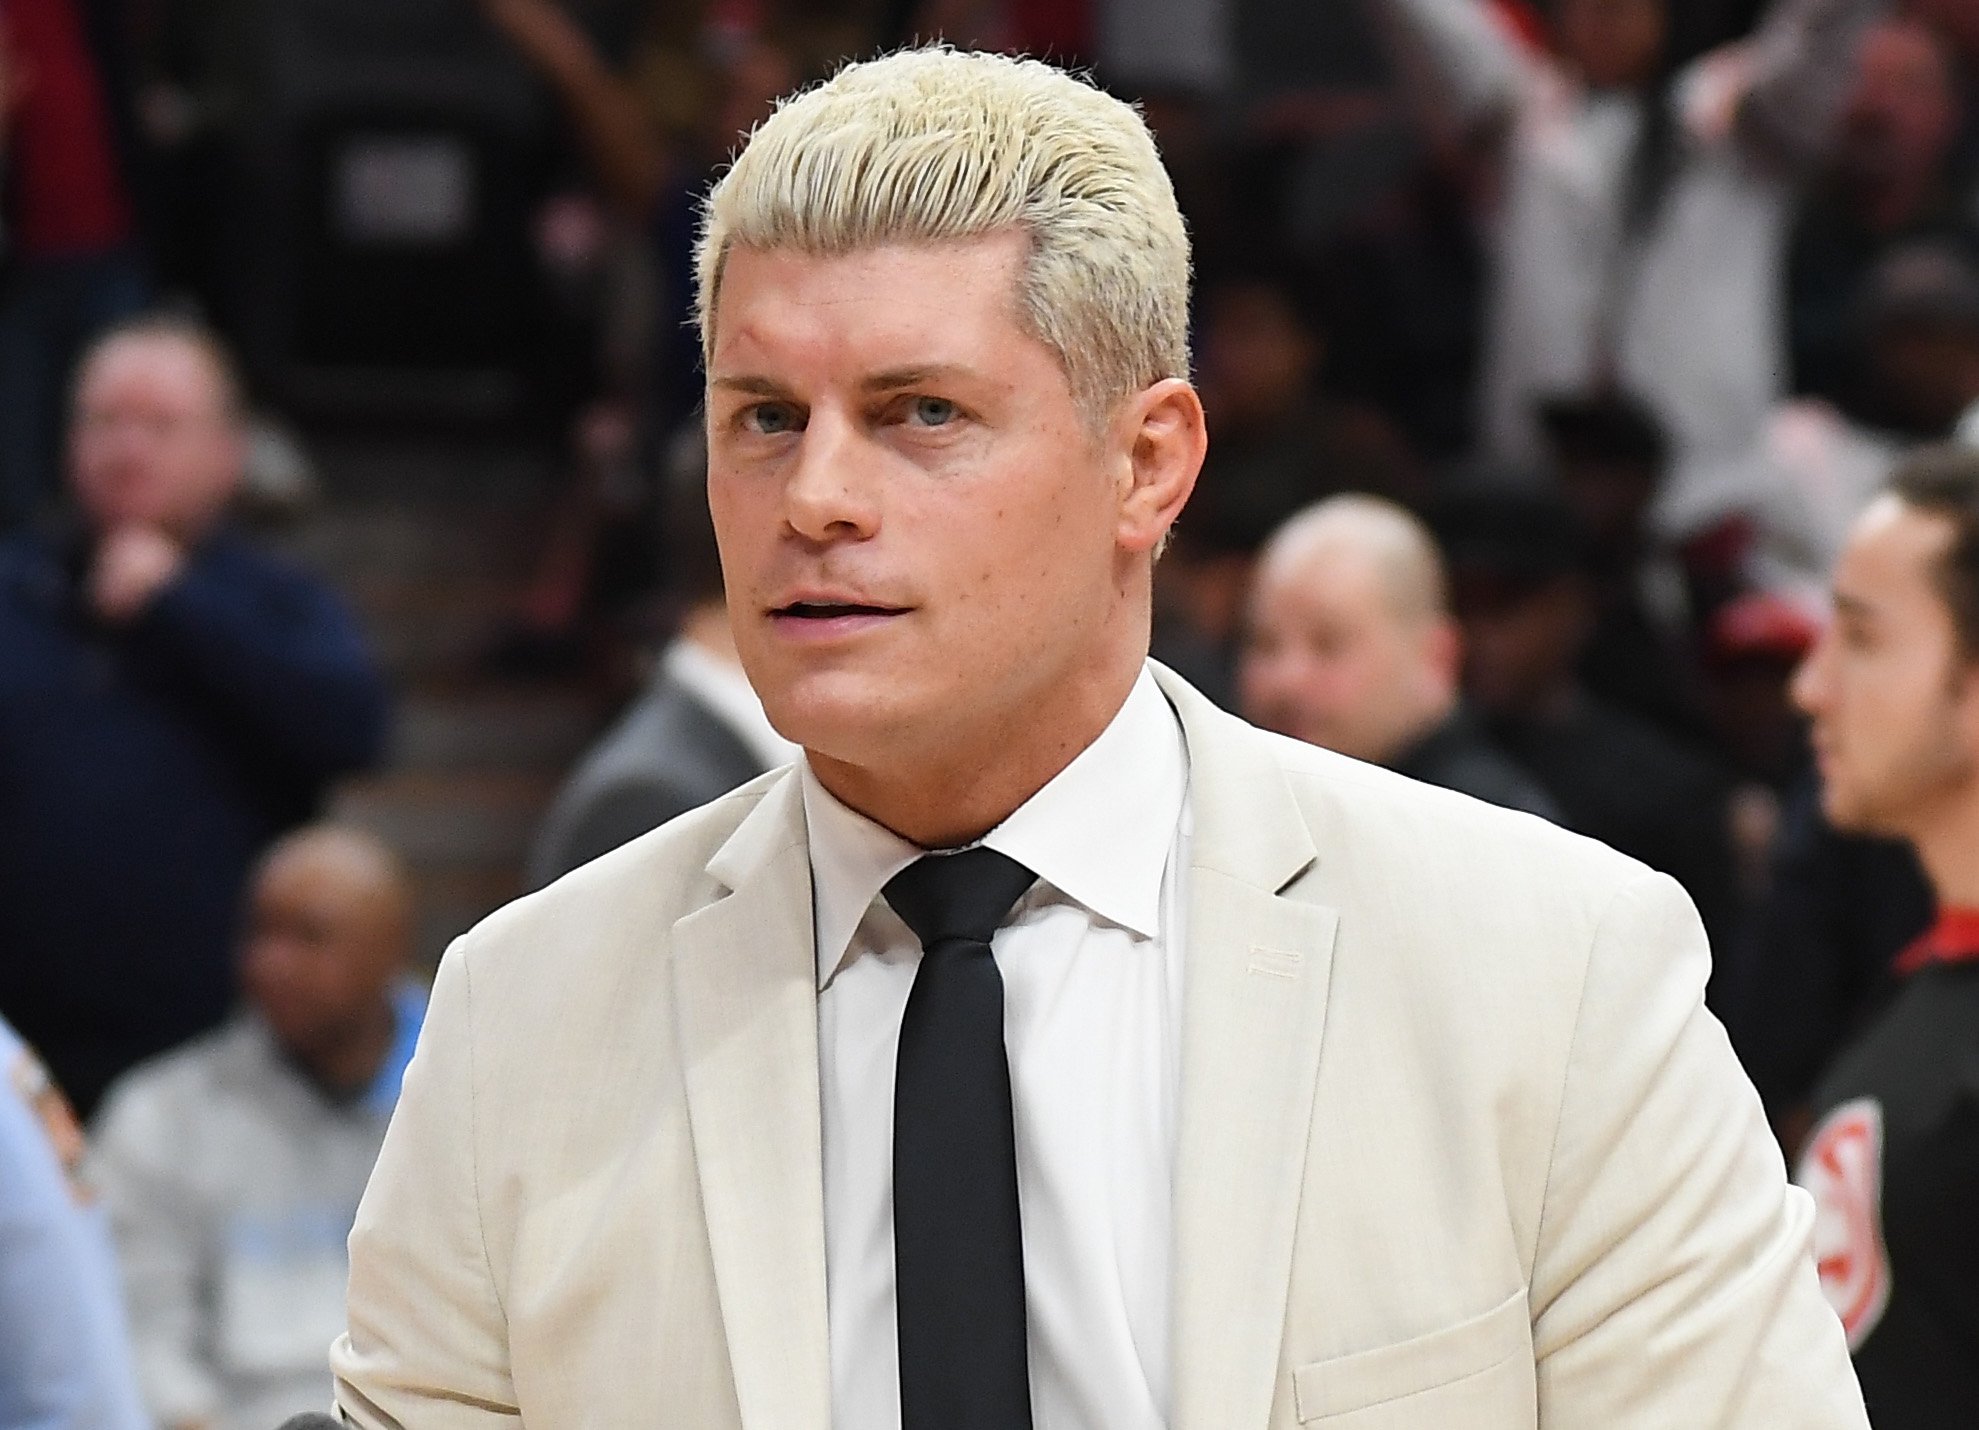 Cody Rhodes attends a New York Knicks game